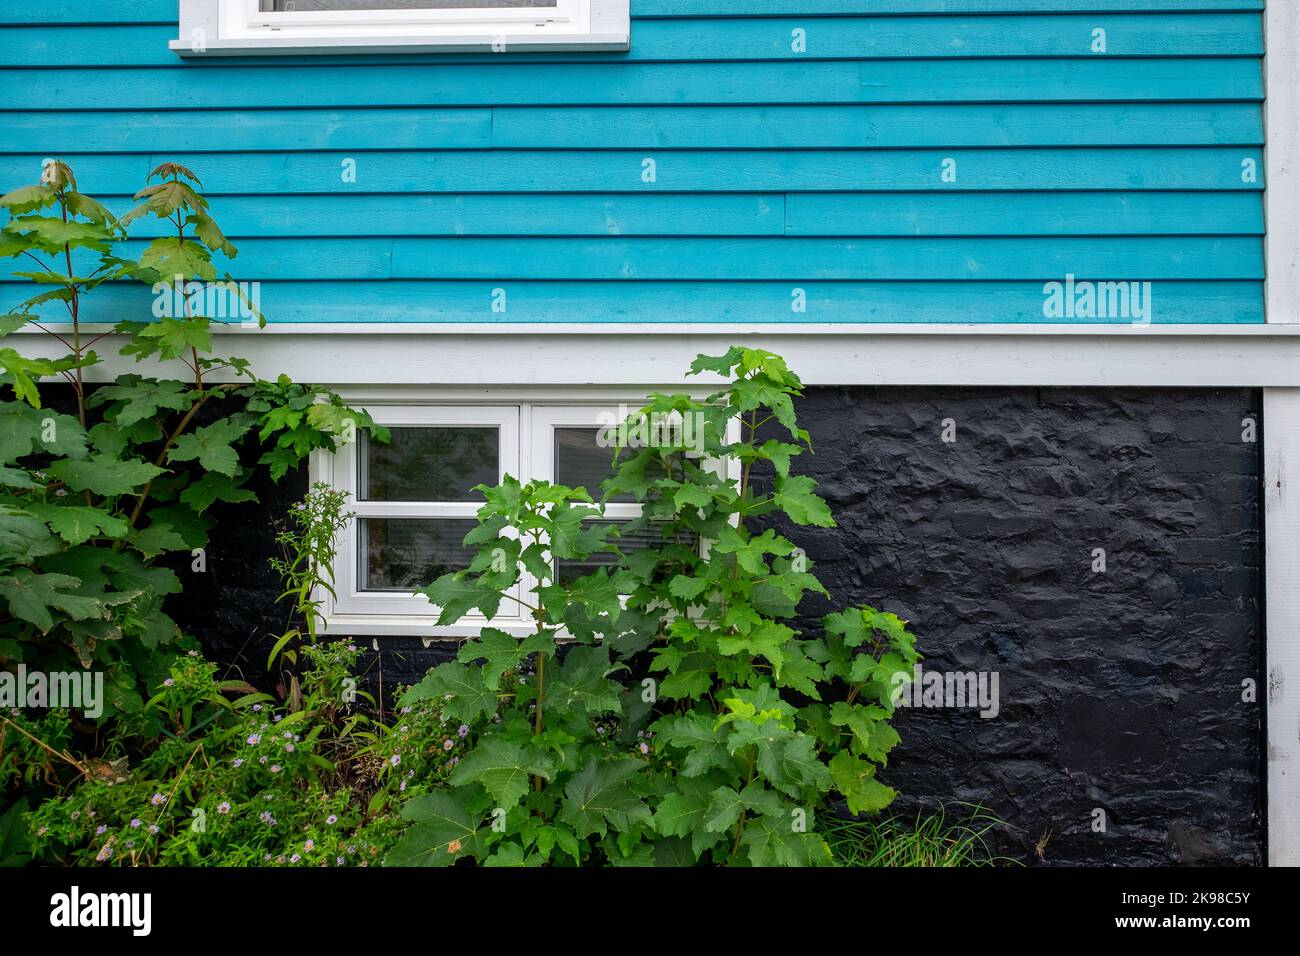 The exterior wall of a vibrant blue wooden house with clapboard. There's a small glass window in the wall. The bottom section of the building is made Stock Photo